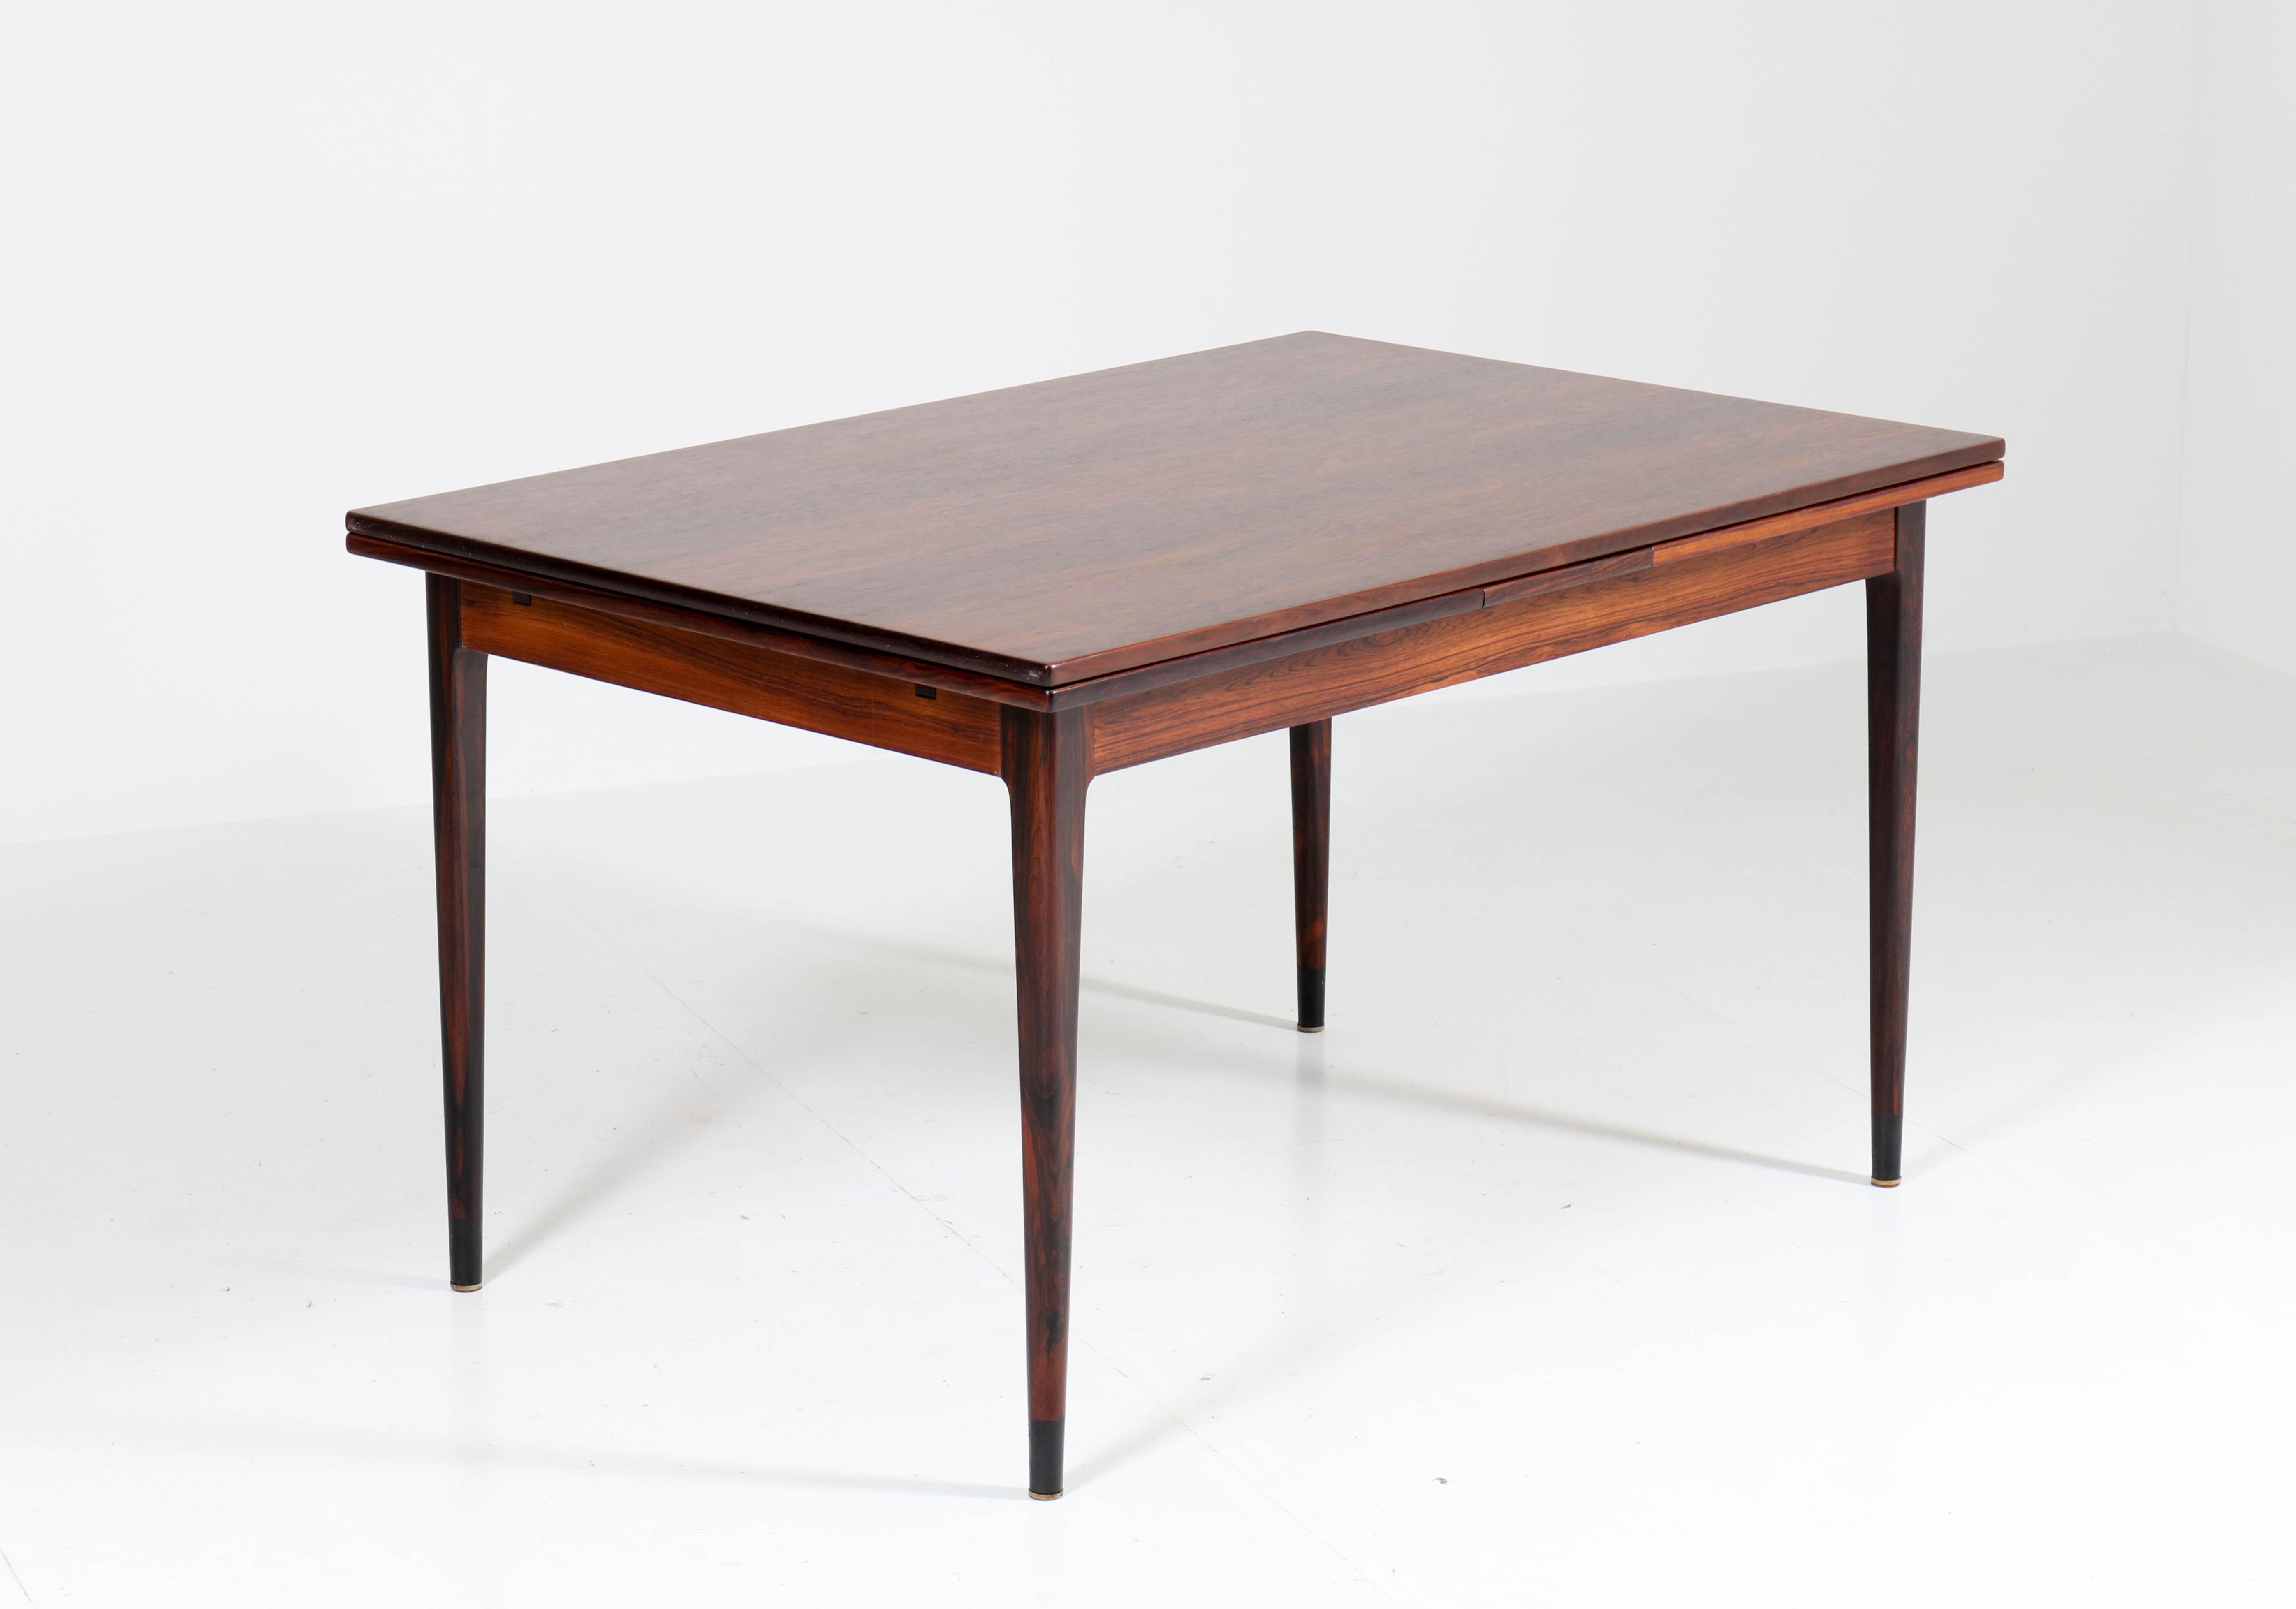 Wonderful and rare Mid-Century Modern extending table.
Design by Niels O. Møller for J.L. Møllers Møbelfabrik.
Iconic Danish design from the 1960s.
Solid rosewood with rosewood veneered top.
Marked with manufacturers mark.
Measurements not